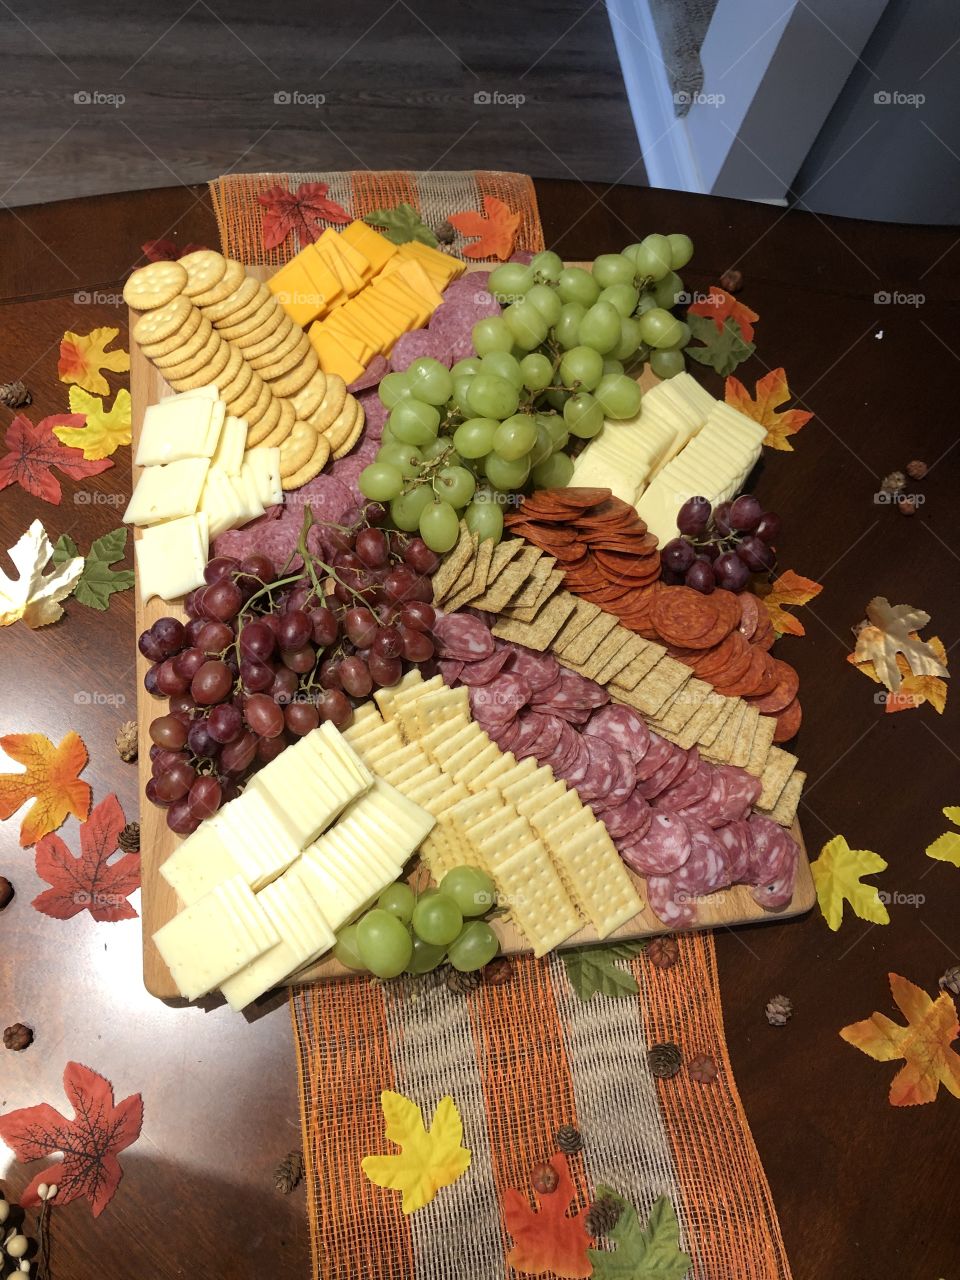 No better time for a lovey charcuterie board